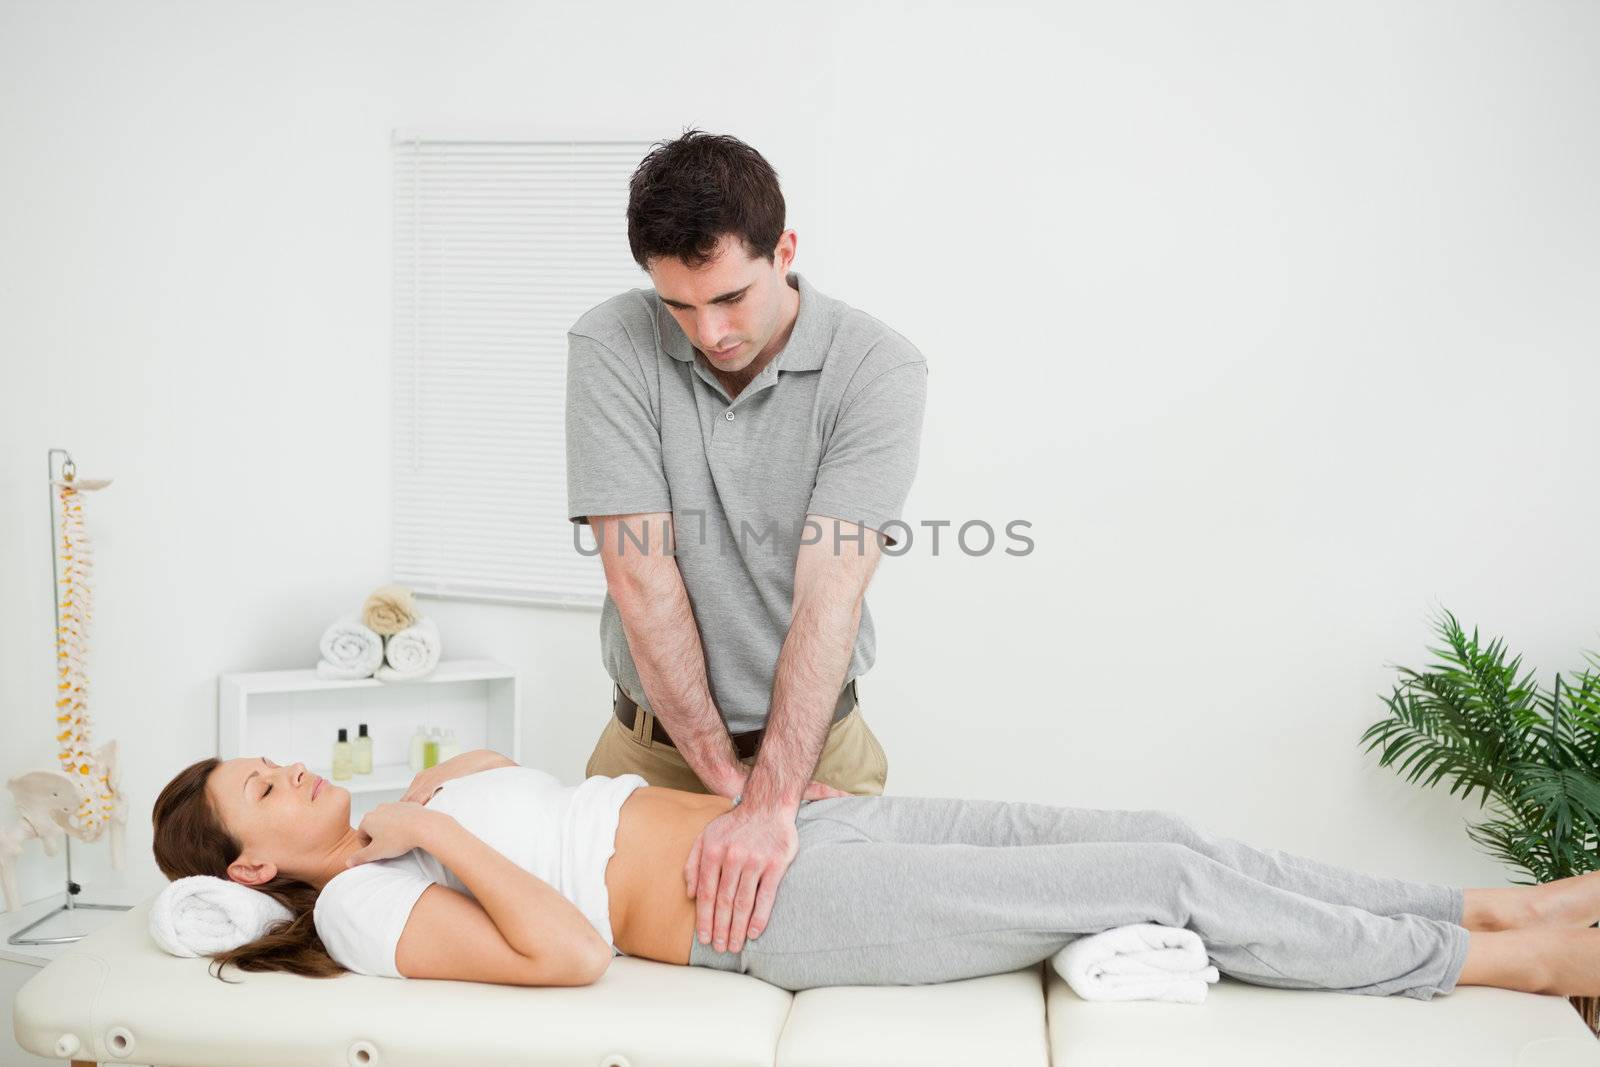 Peaceful woman being touched by an osteopath in his medical room